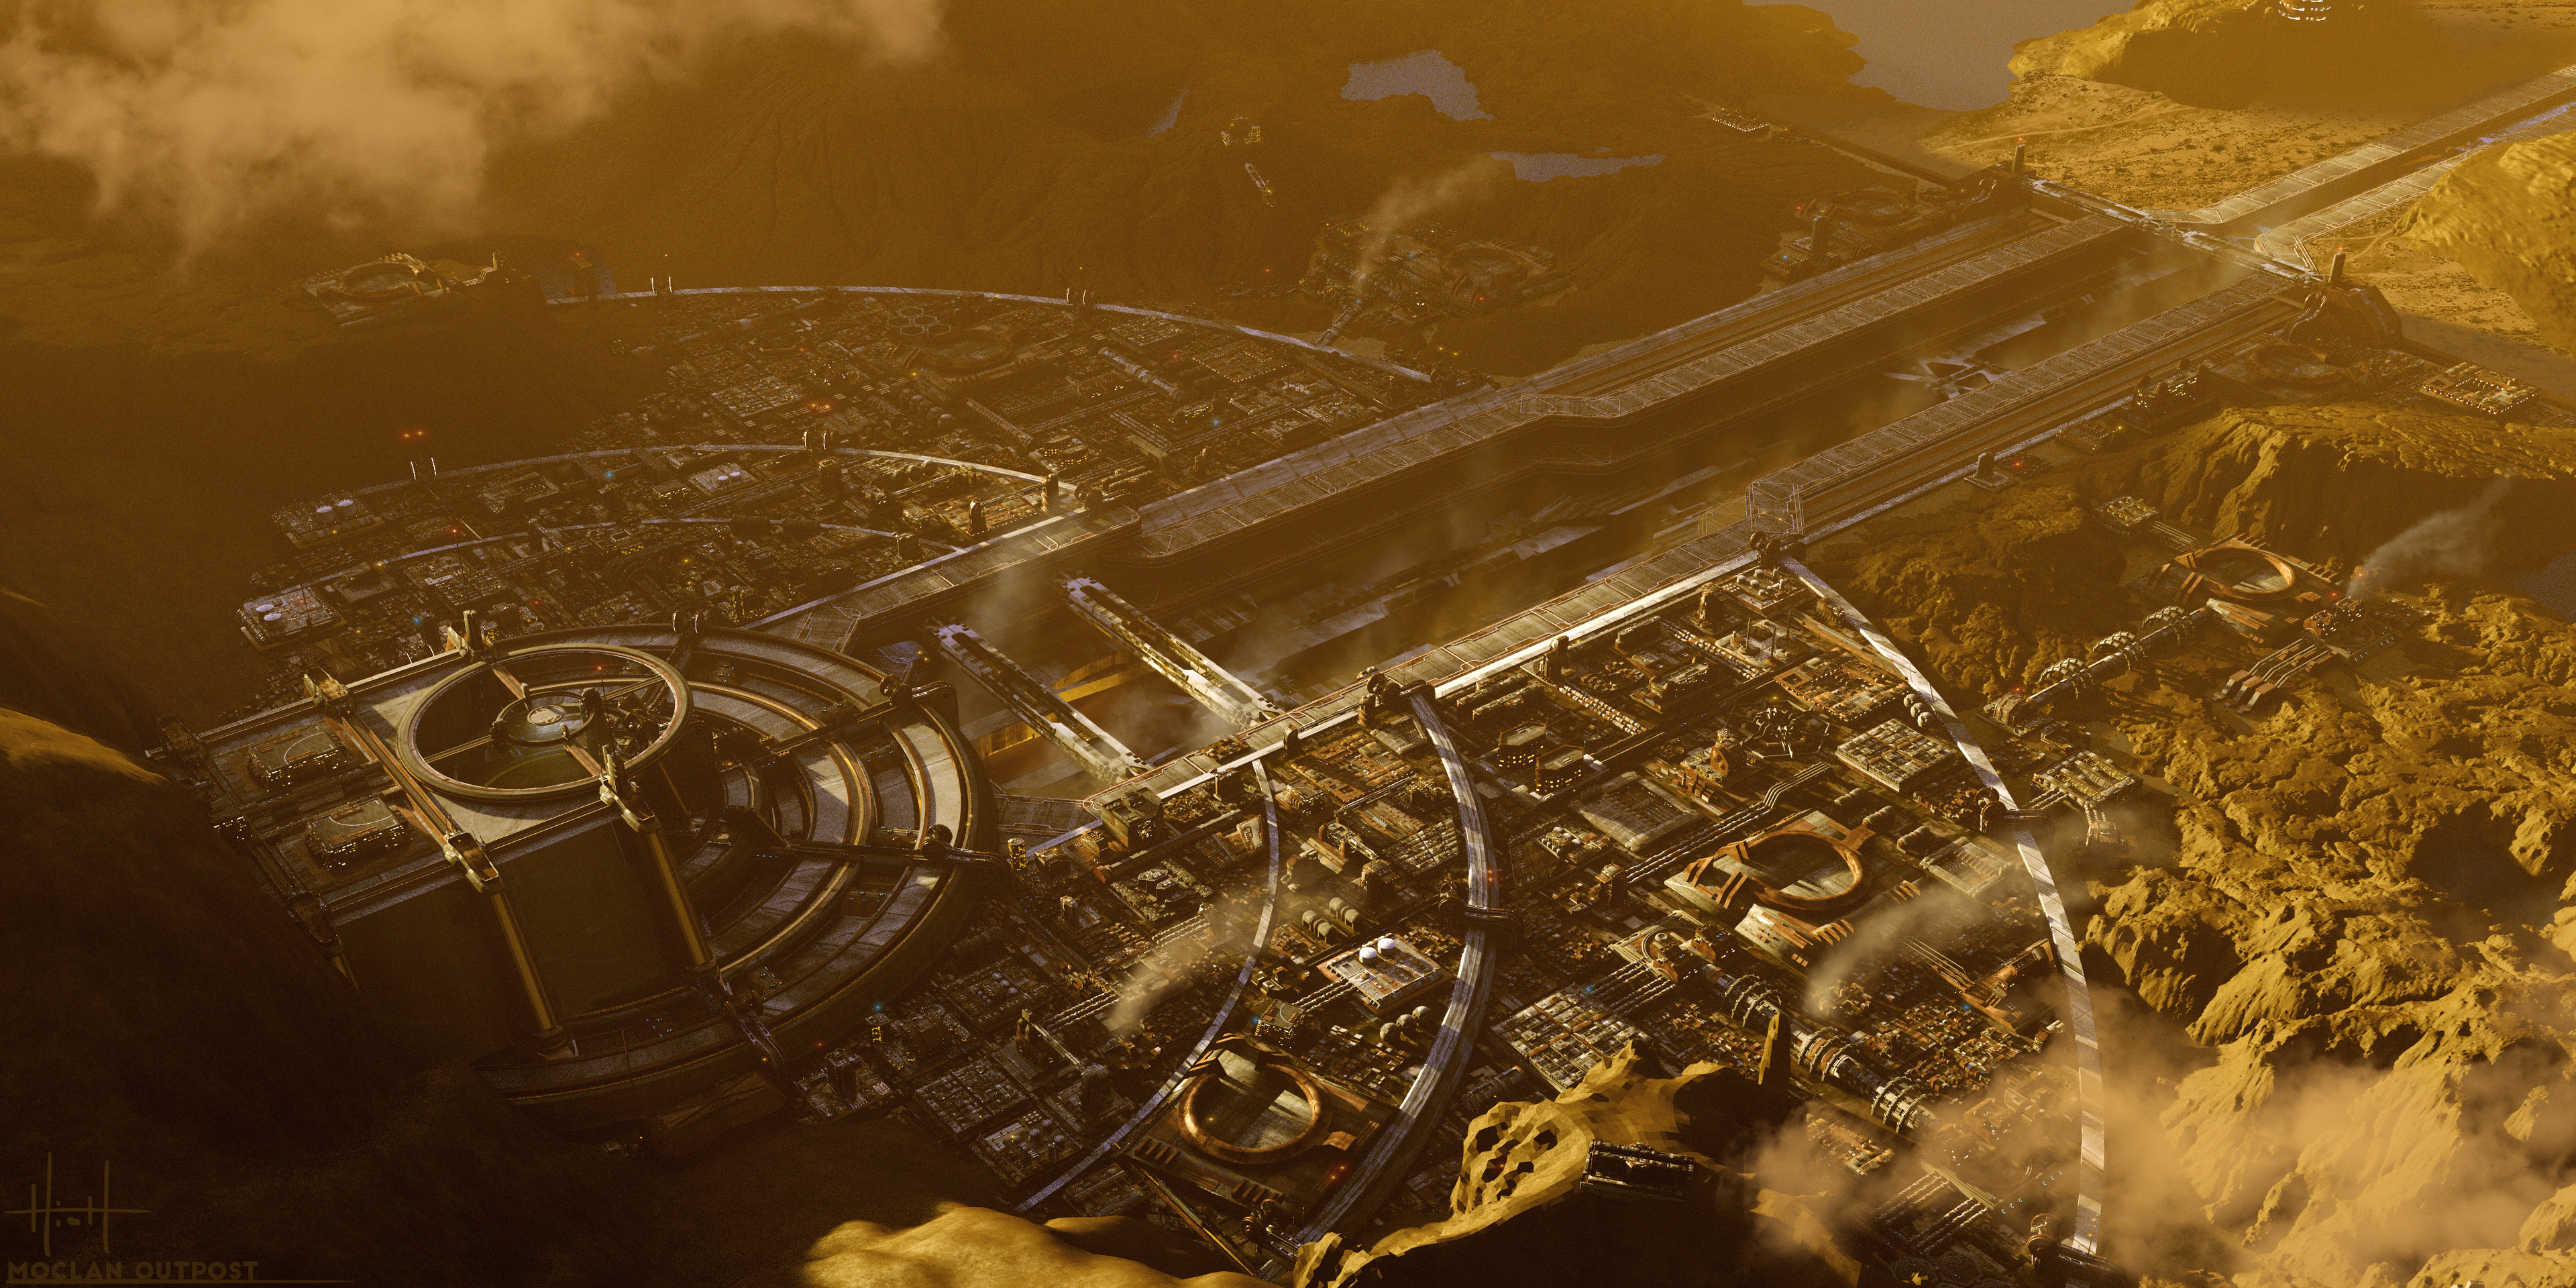 'the Orville' :  Moclan Outpost
Concept Art